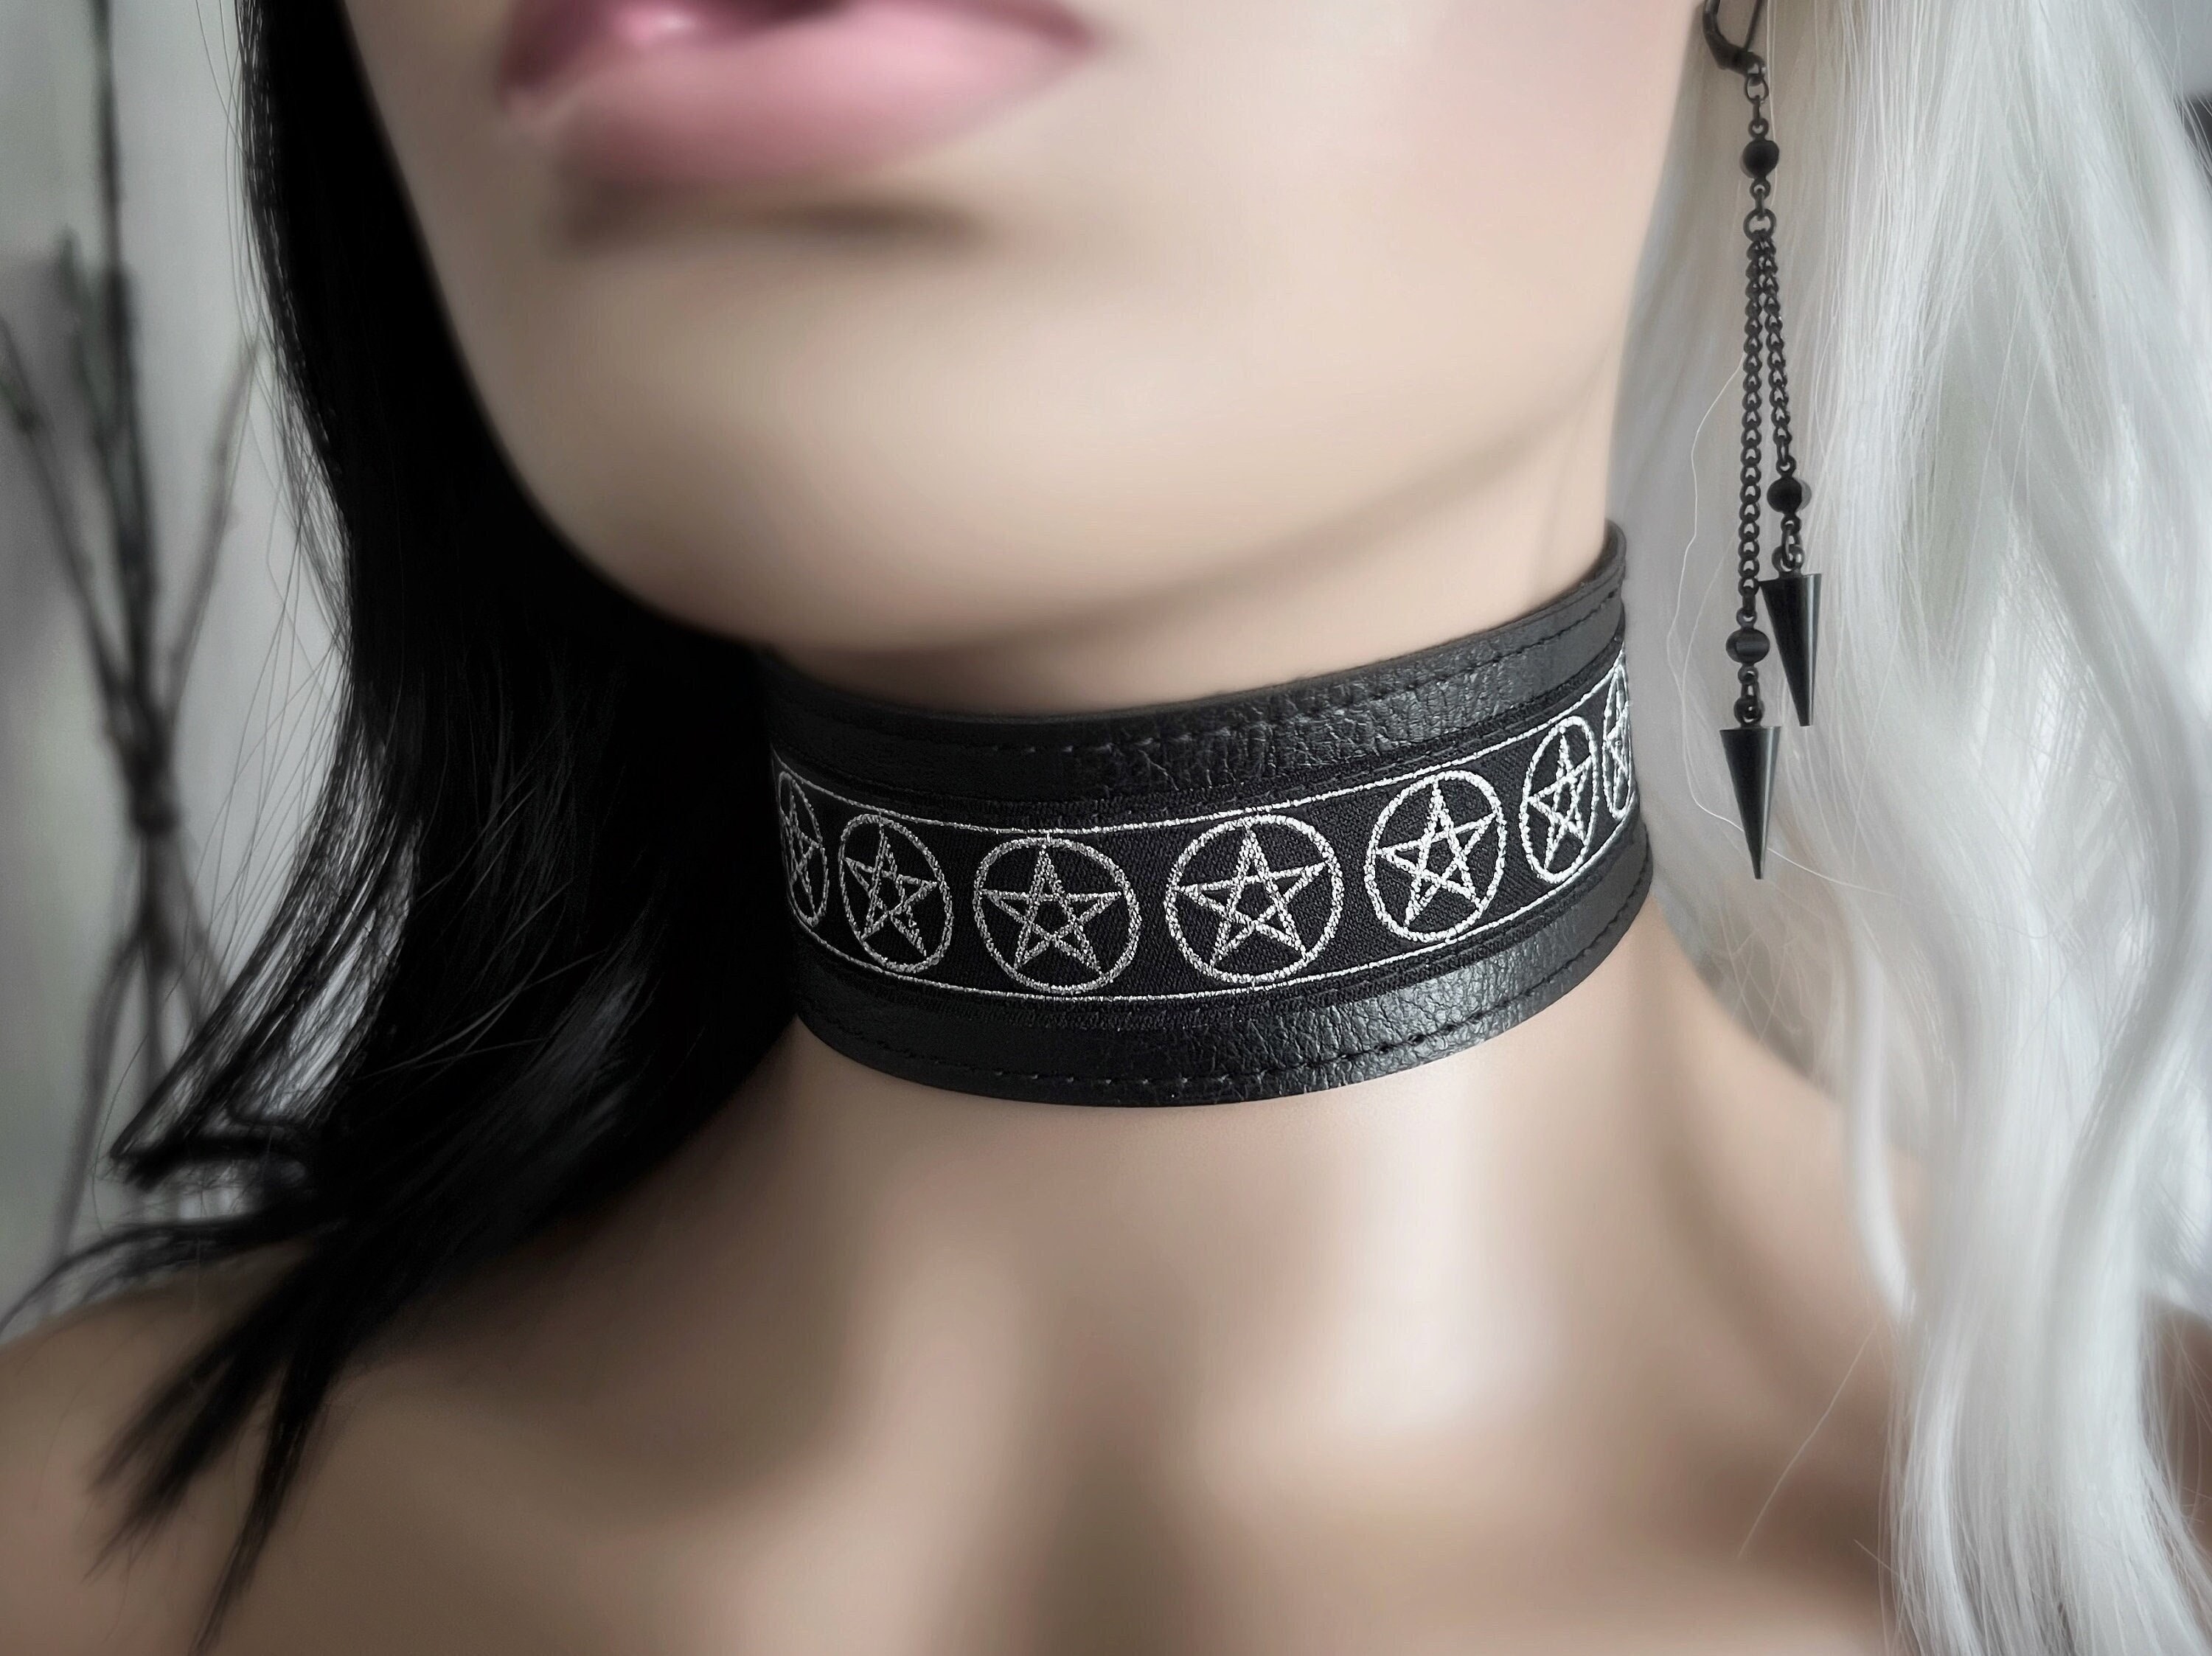 Sixexey Punk Choker Necklaces Black Leather Necklaces Goth Rock Collar  Halloween Cosplay Nightclub Neck Accessory for Women and Girls (Heart  tassel)